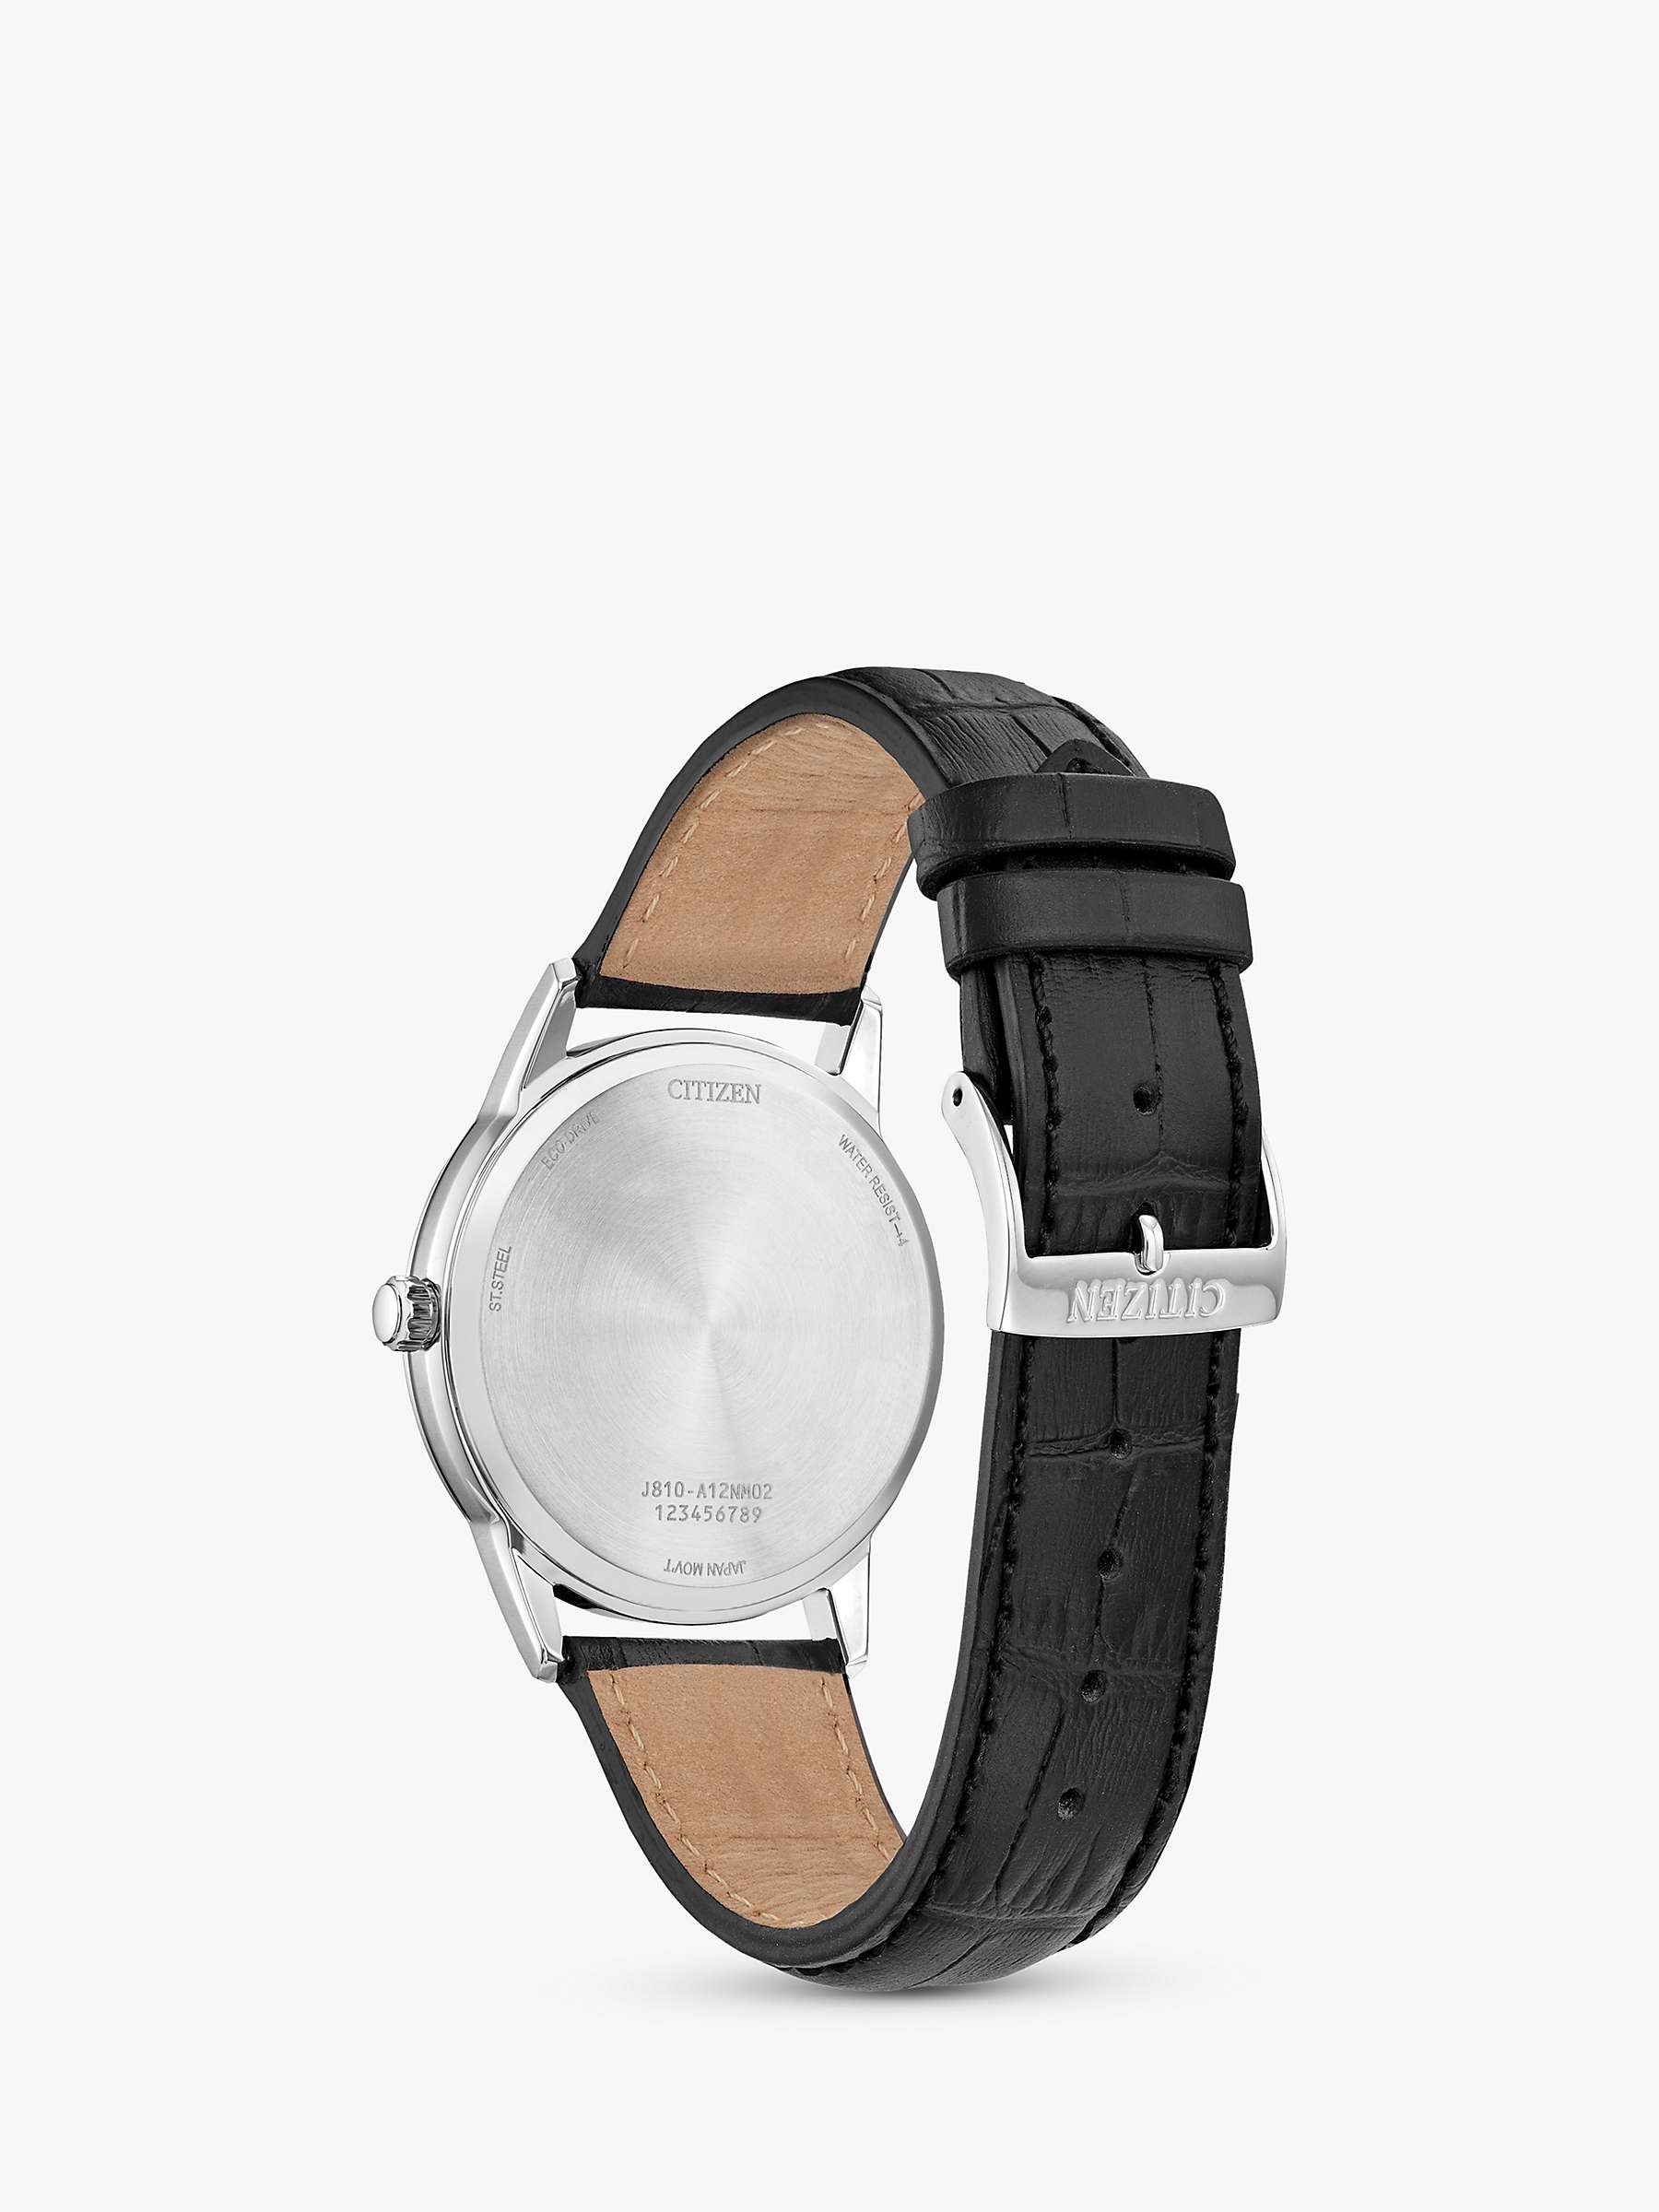 Buy Citizen Men's Eco-Drive Date Leather Strap Watch Online at johnlewis.com